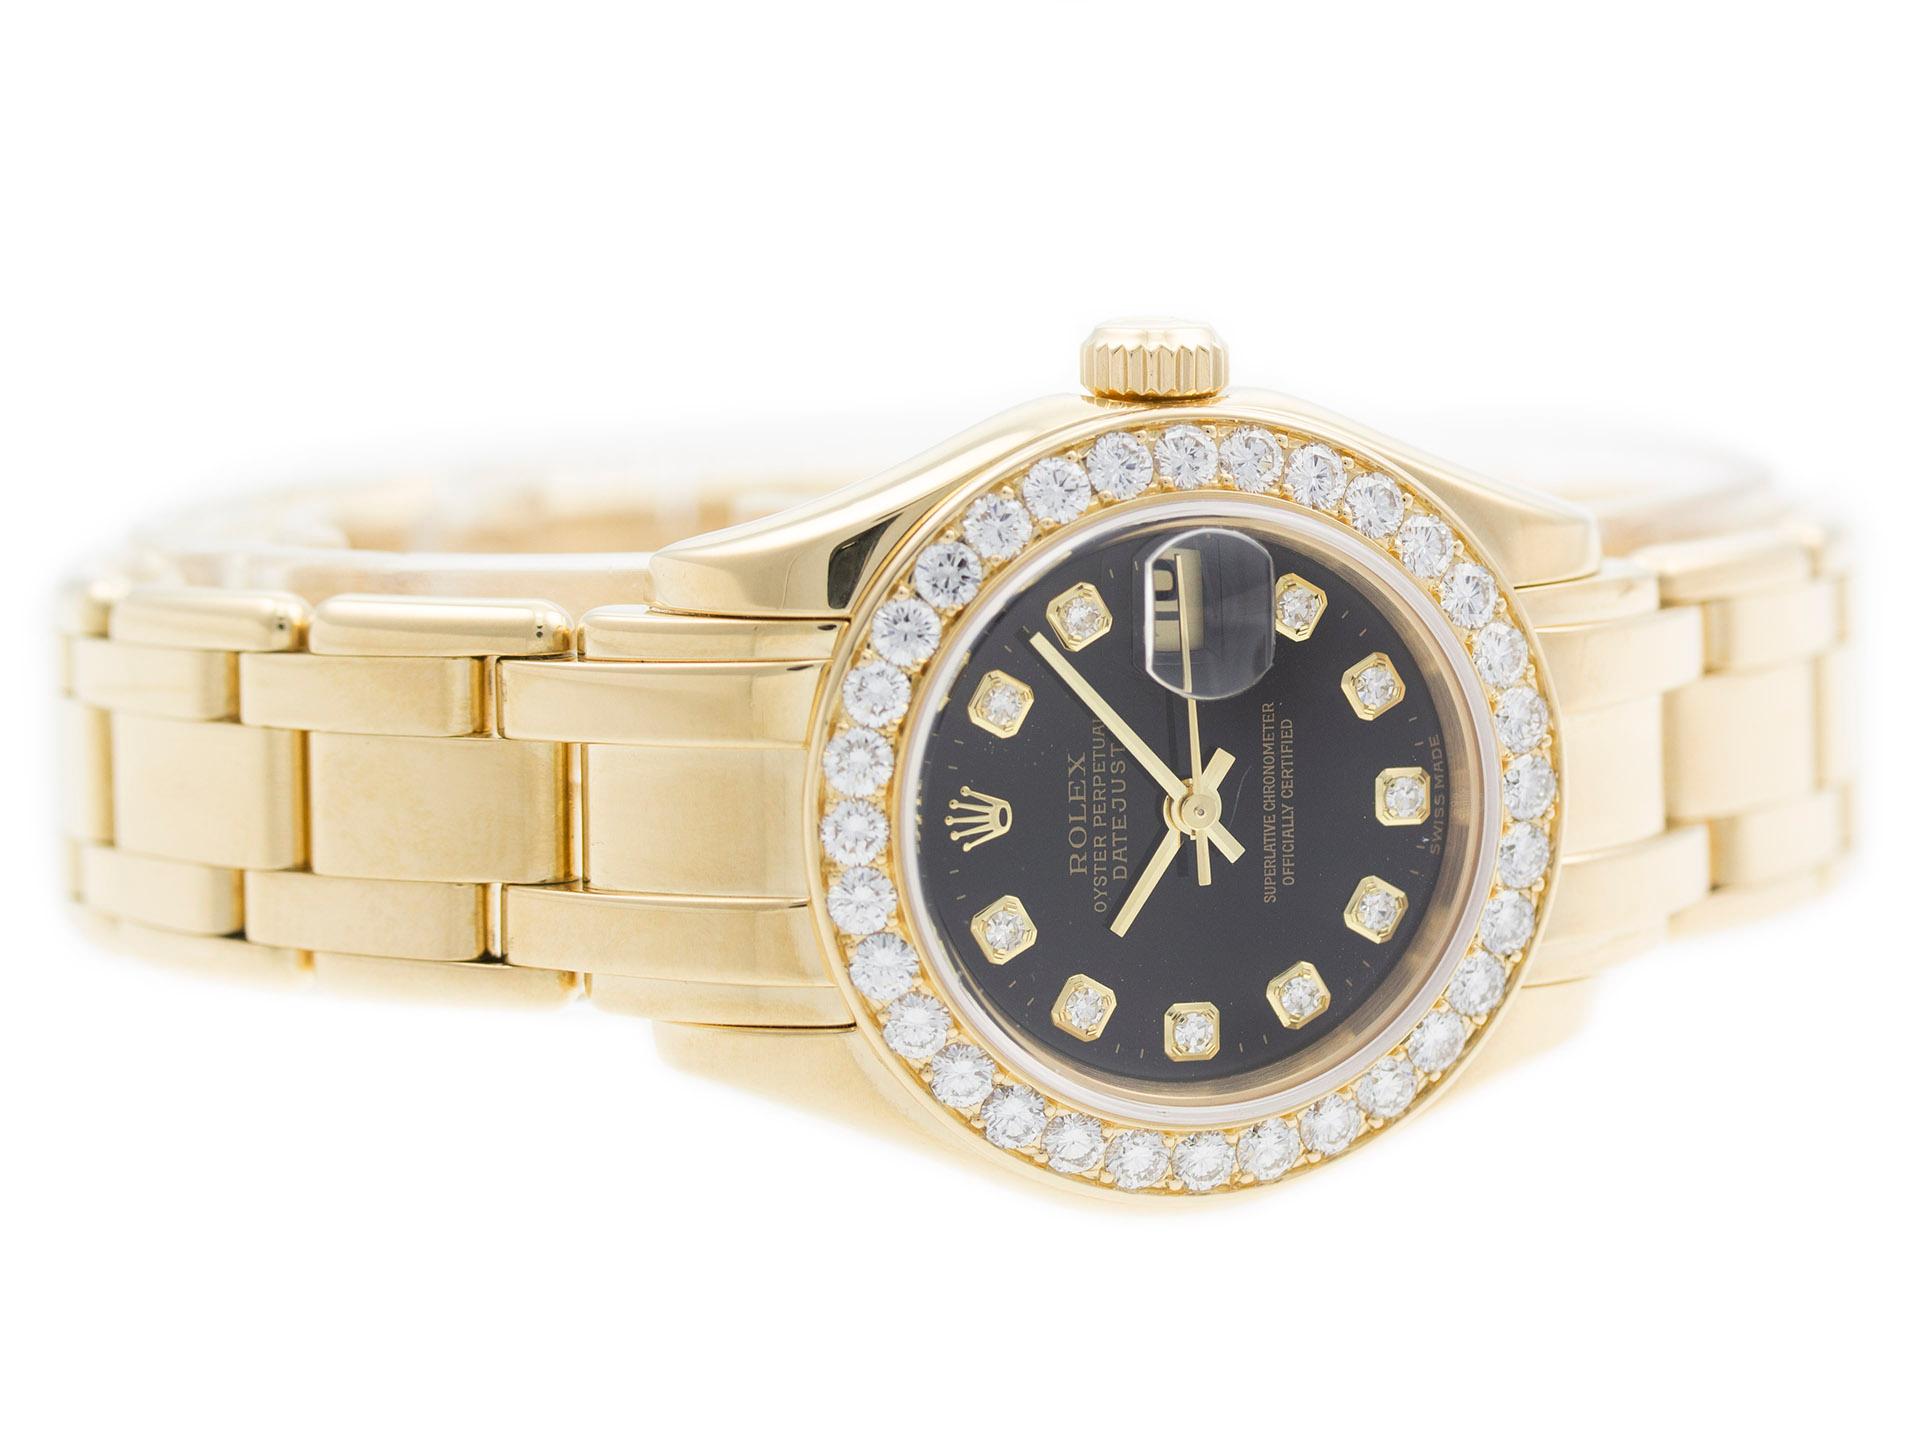 18k Yellow Gold Pre-owned Rolex Pearlmaster 29 80298 watch, water resistant to 100m, with diamond dial & bezel, date, and bracelet.

Watch	
Brand:	Rolex
Series:	Datejust Pearlmaster 29
Model #:	80298
Gender:	Ladies’
Condition:	Great Condition